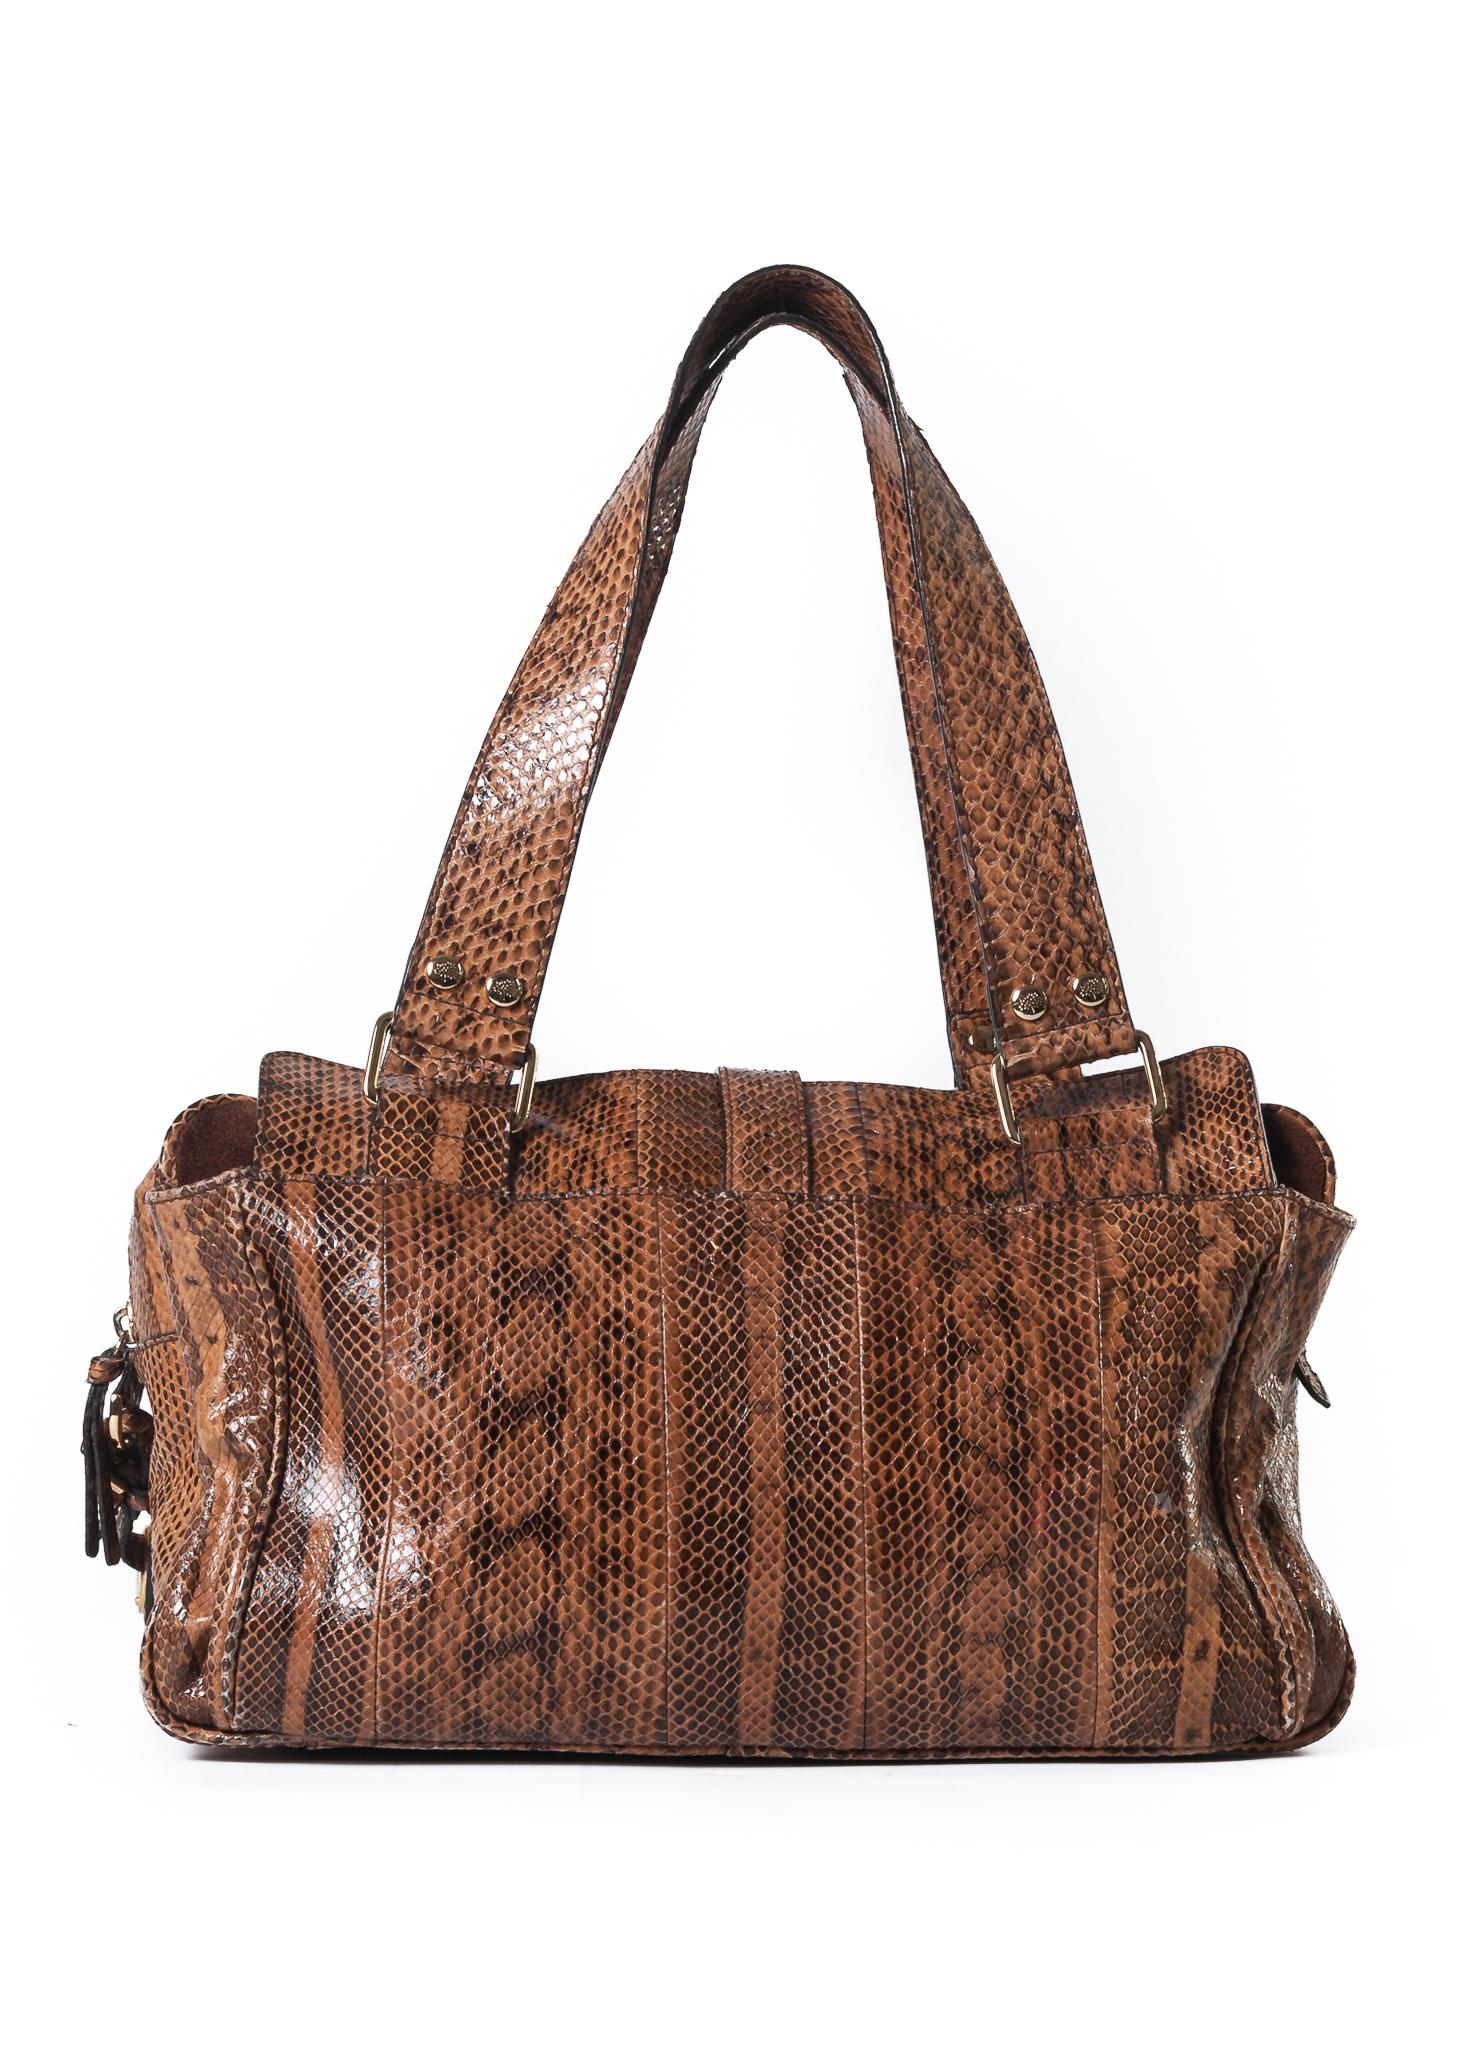 This Mulberry Bowling bag is made of python skin and features two exterior zip pockets and two exterior slip pockets with suede lining, an interior zip pocket, lined in Mulberry’s signature fabric, and large statement gold toned hardware. 

COLOR: